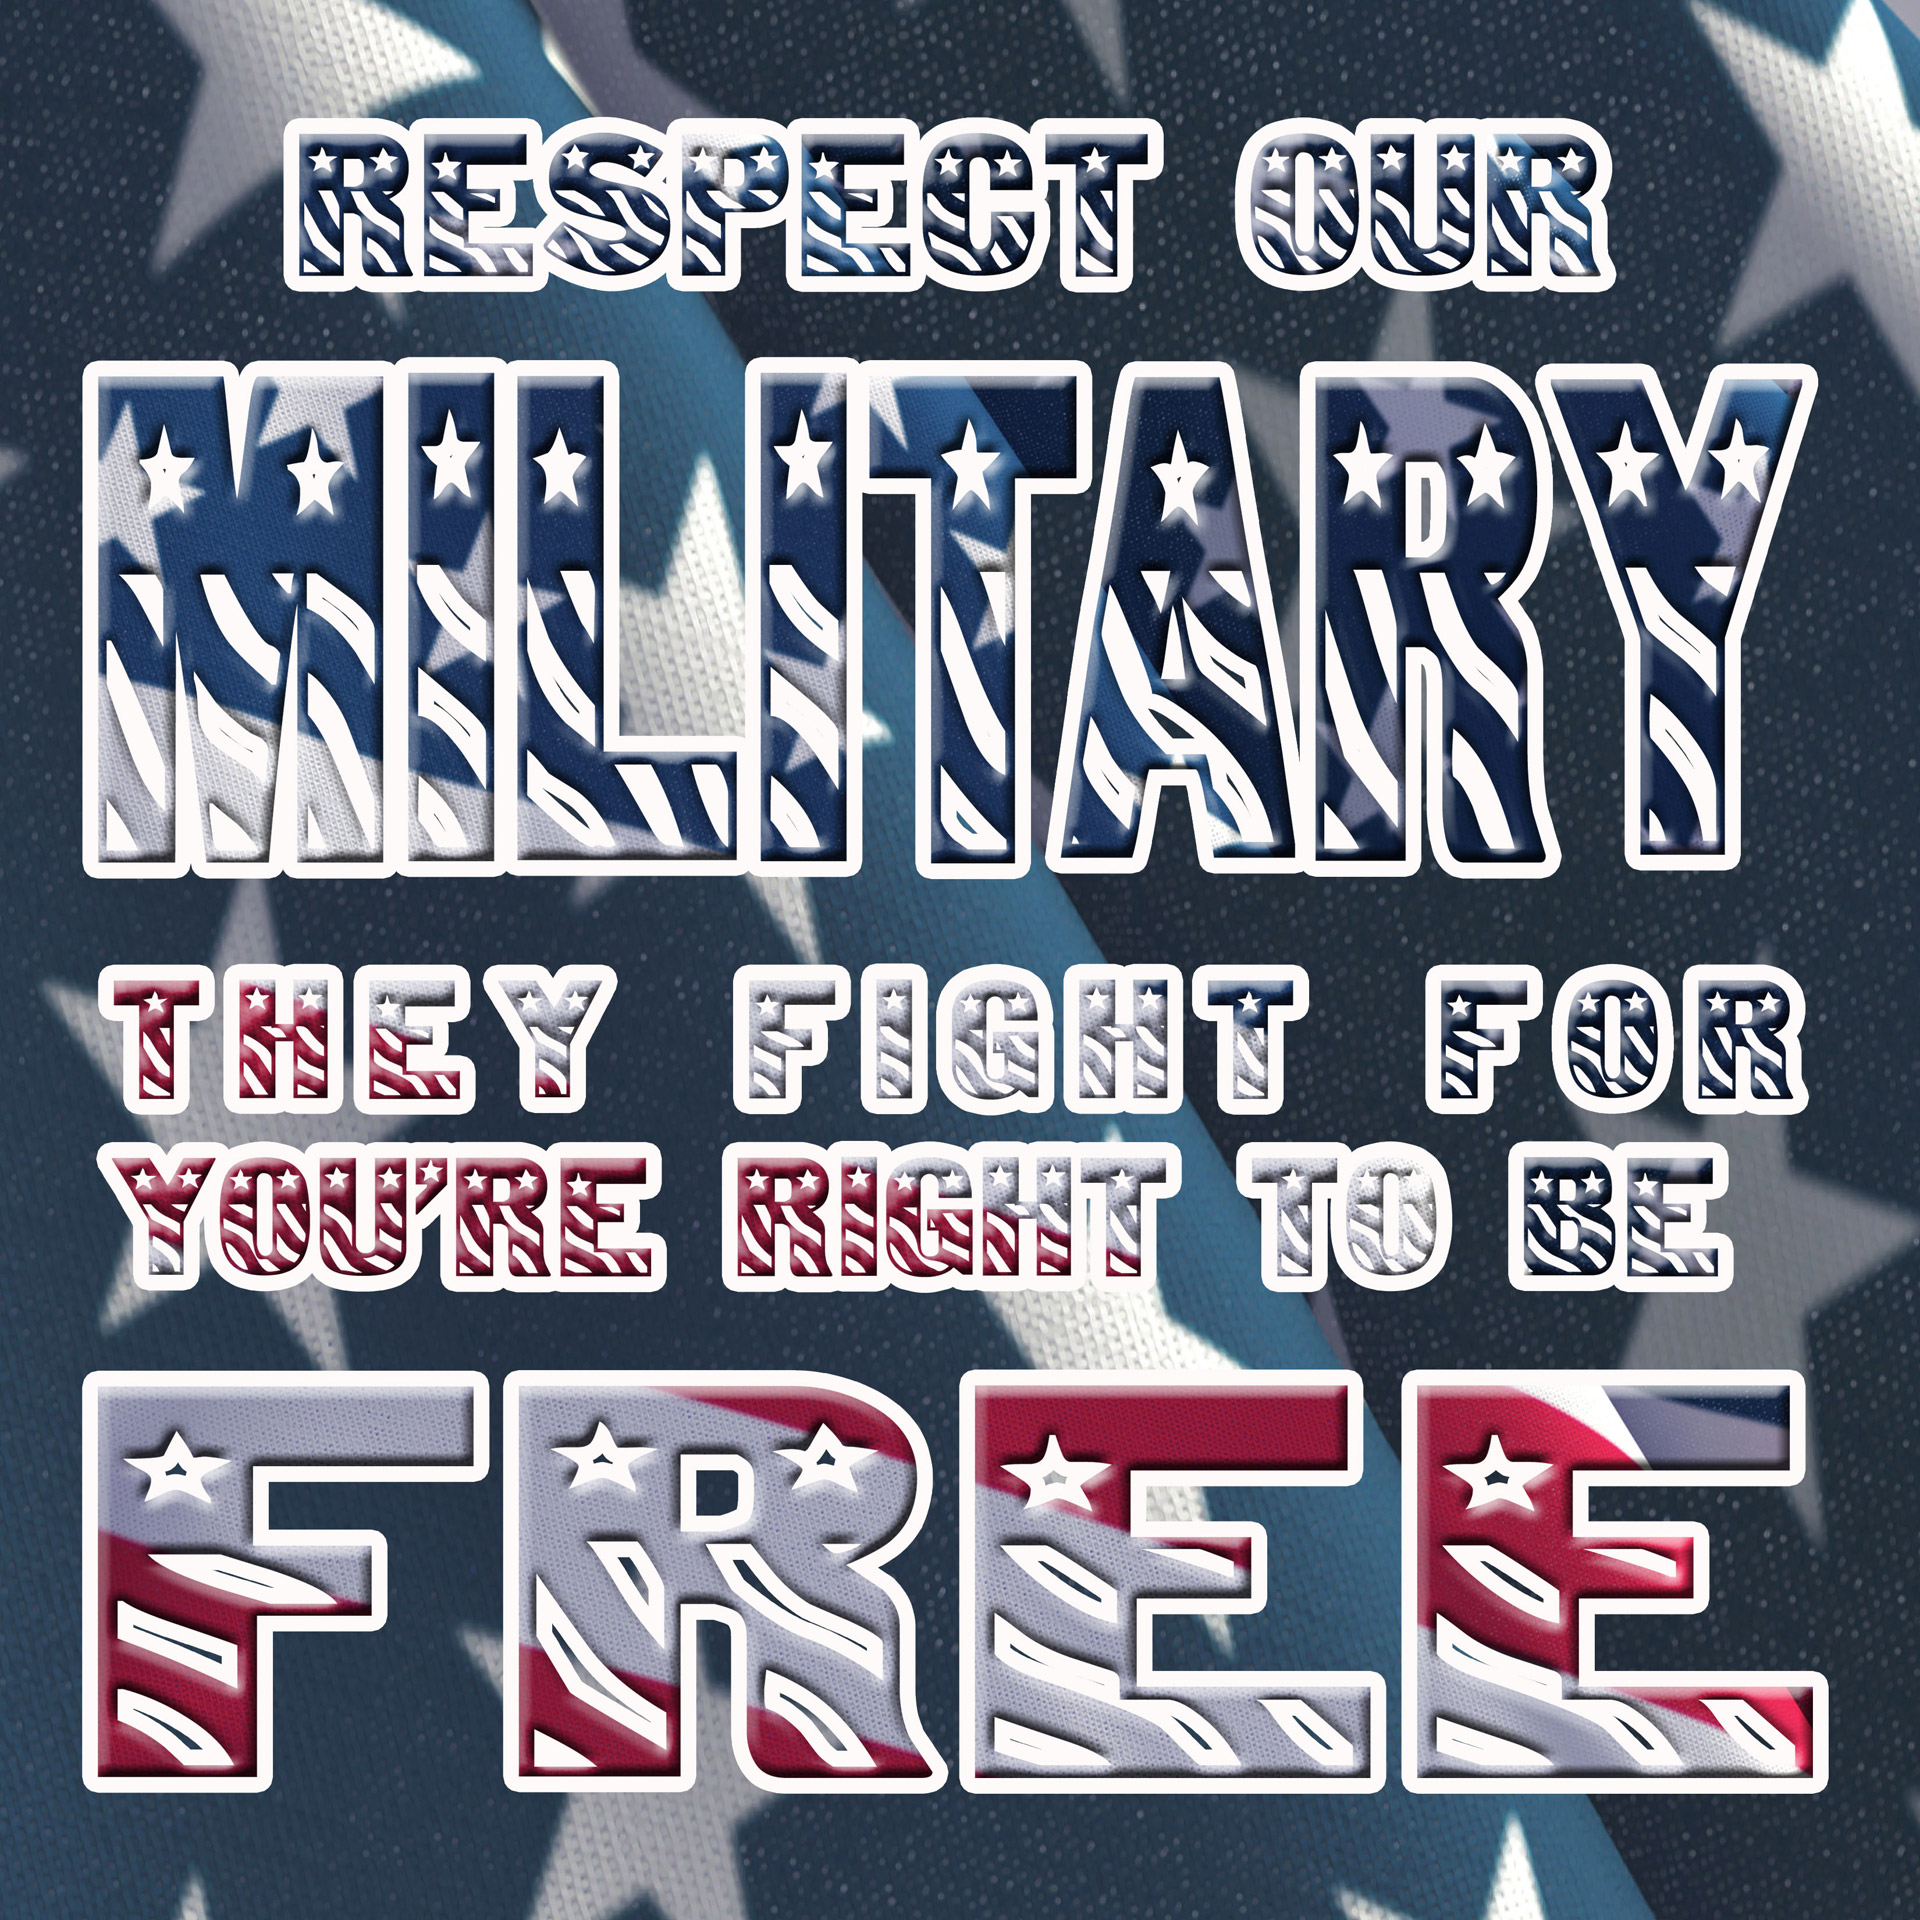 respect military right to be free free photo